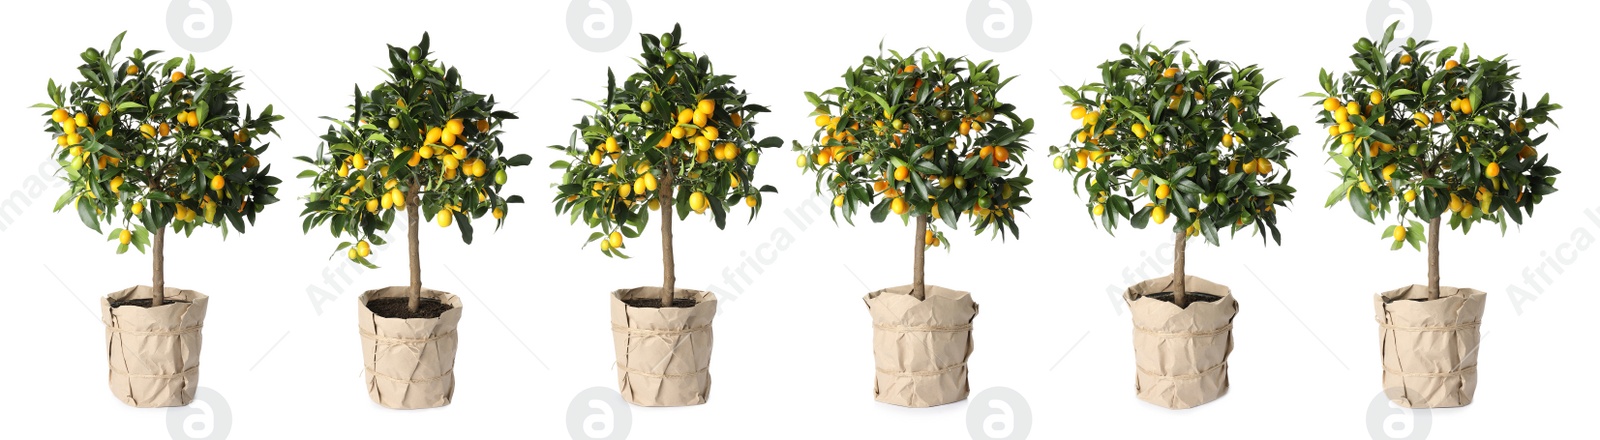 Image of Set of kumquat trees with fruits in flowerpots on white background. Banner design